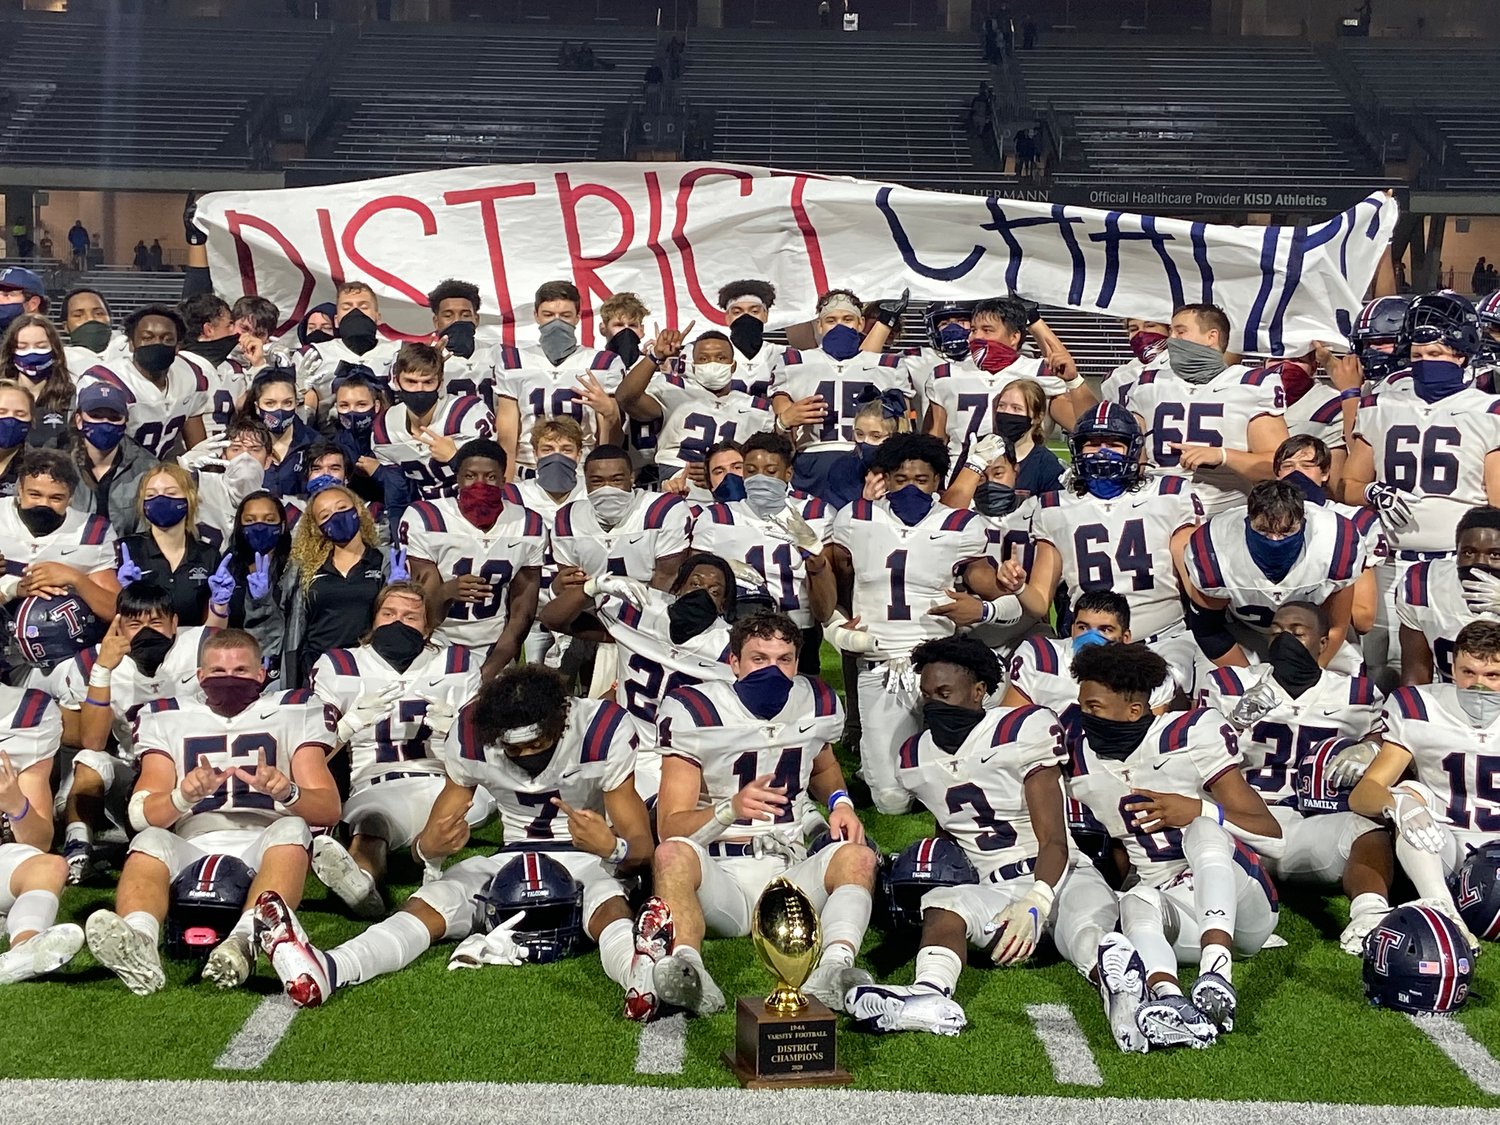 Tompkins players celebrate with a 'District Champs' banner and the 19-6A district championship trophy following their win over Seven Lakes on Nov. 27.